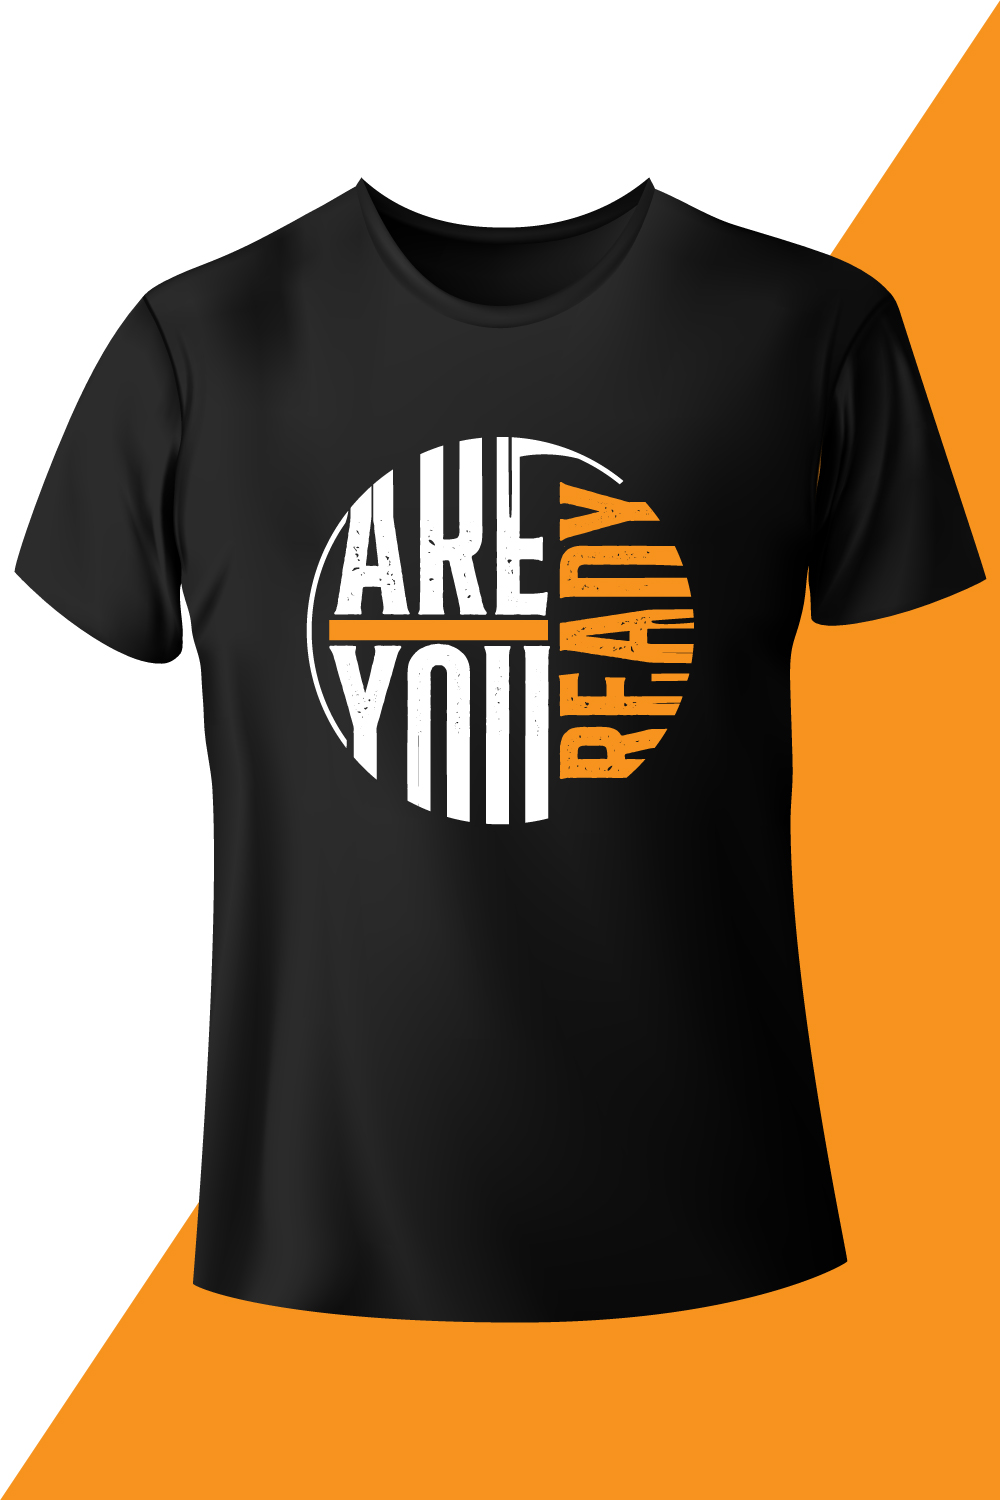 Image of a black t-shirt with a charming inscription Are You Ready.